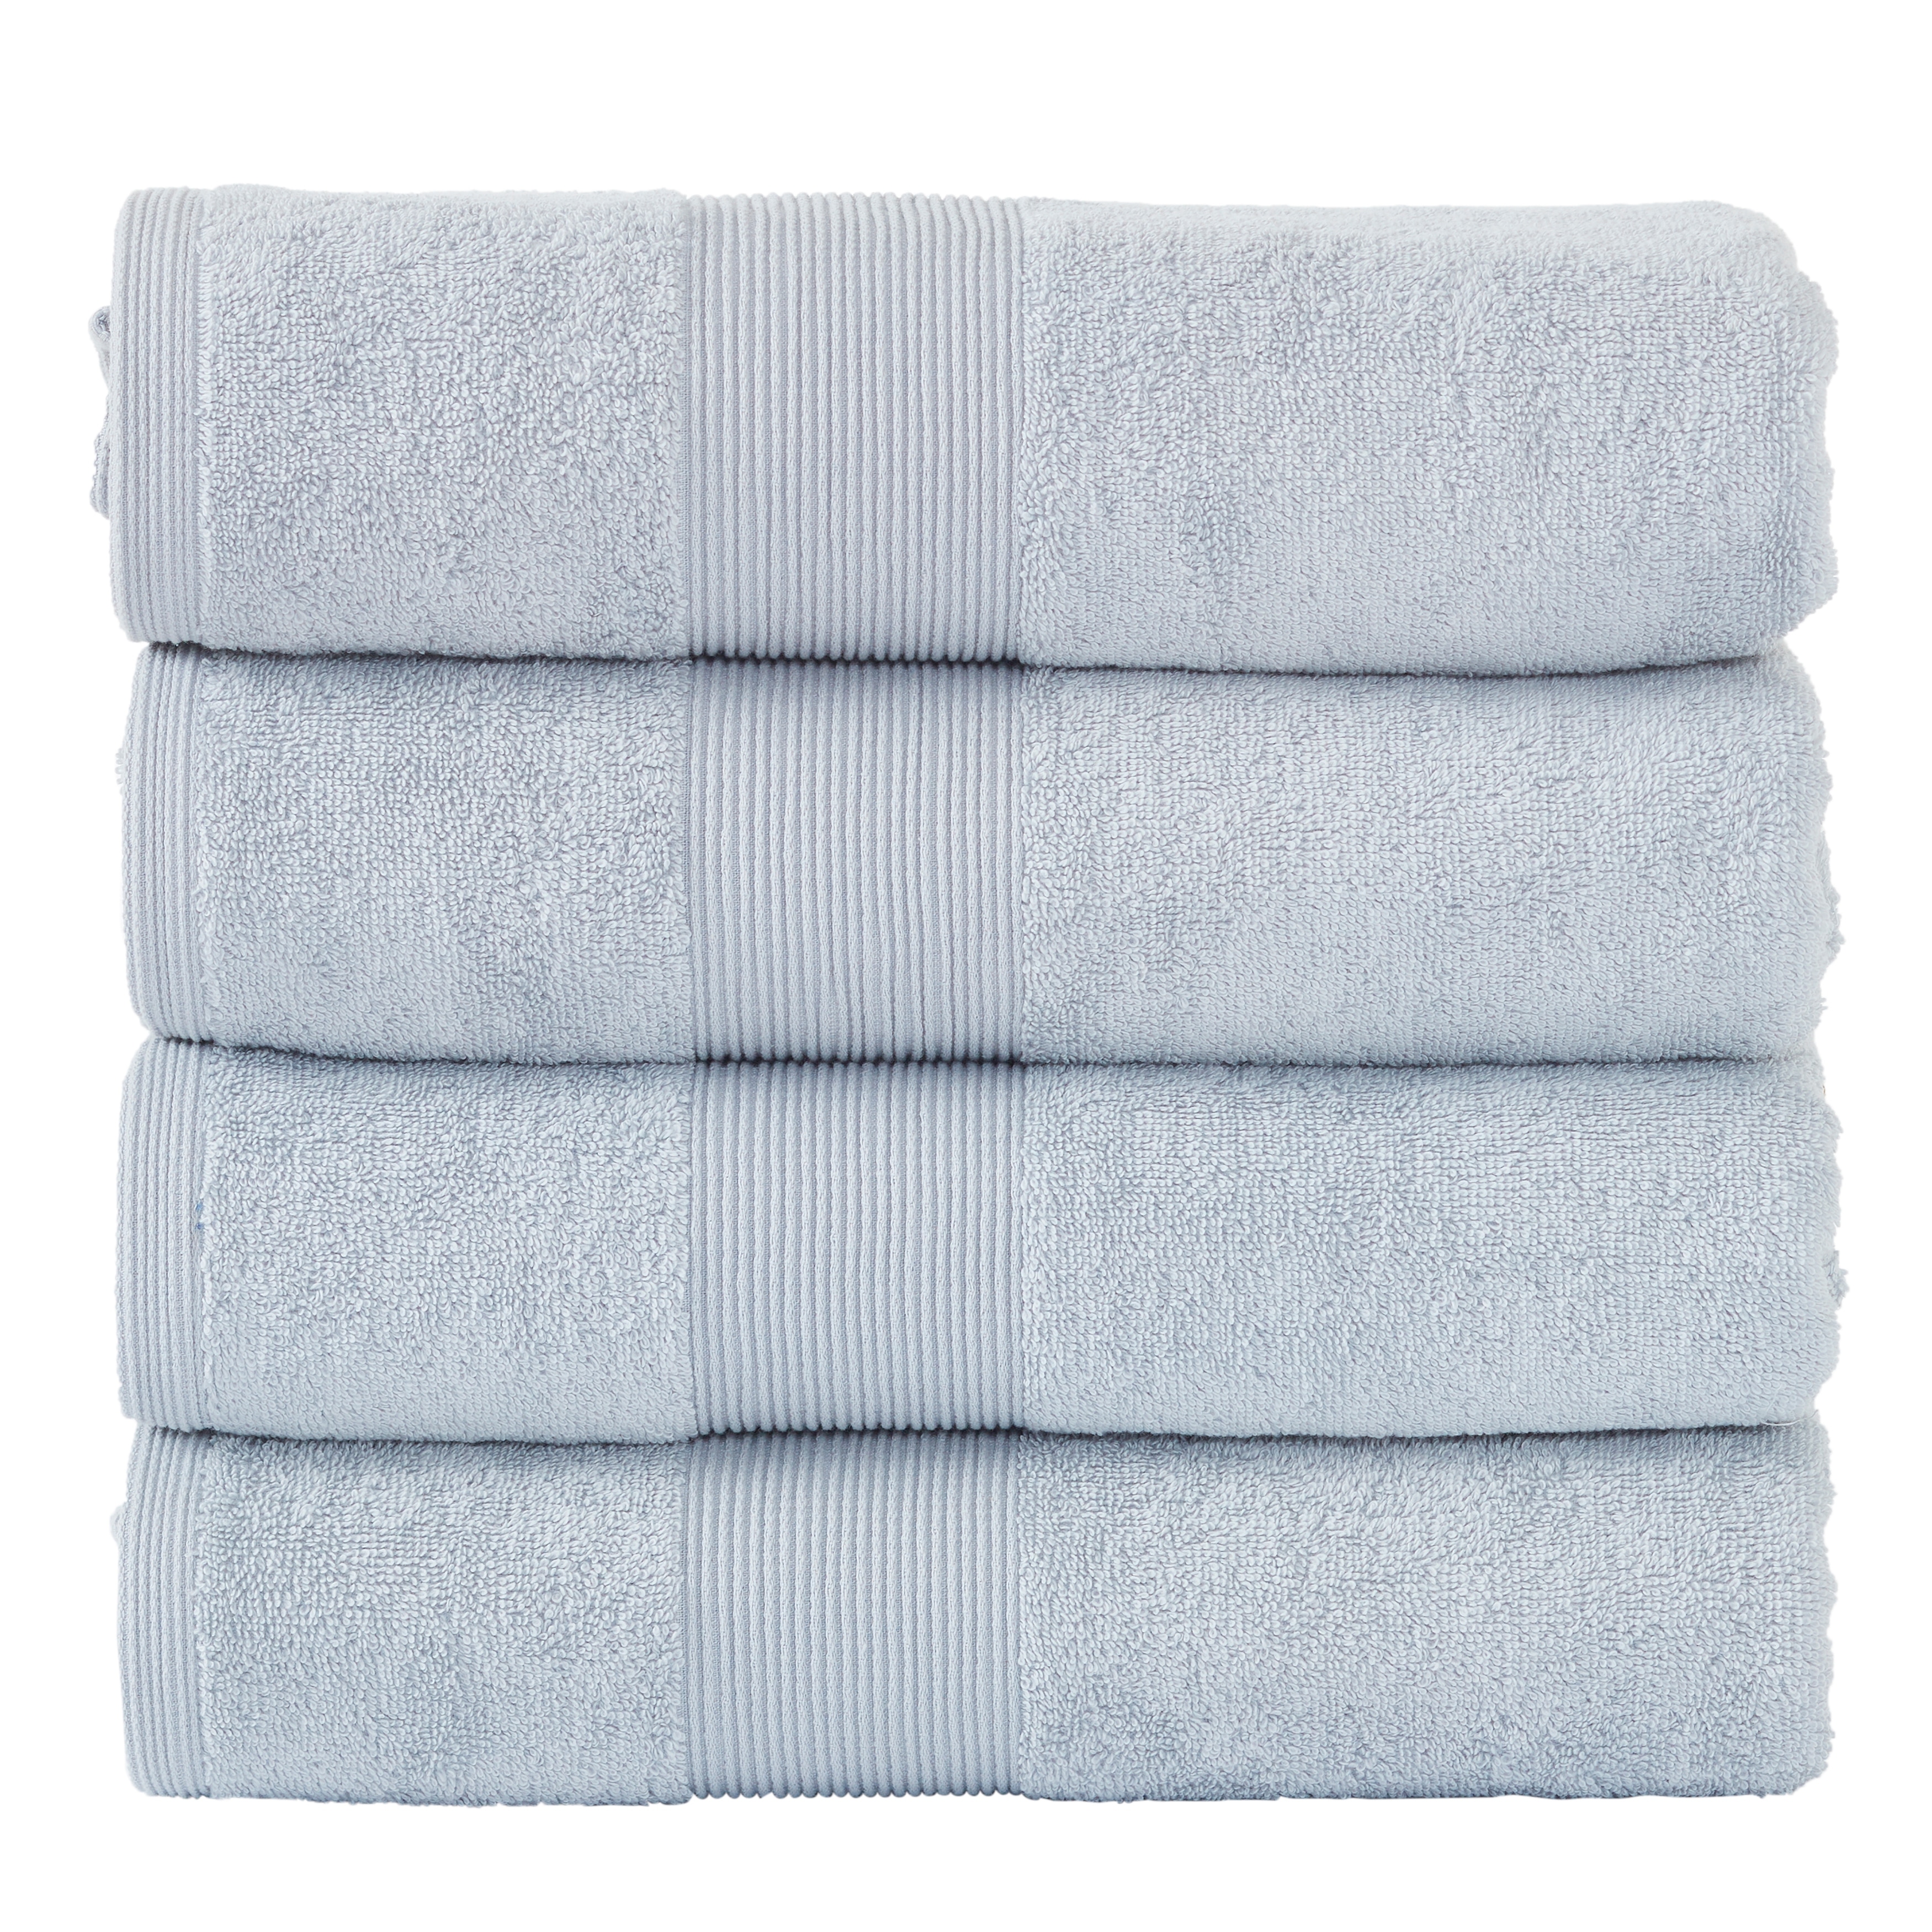 6 Piece Bath Towel for Bathroom 27x54 Towel Set, Ultra Soft Absorbent Bathroom  Towel for Home and Hotel Shower Towel Large Bath Towels 600 GSM, Pale Green